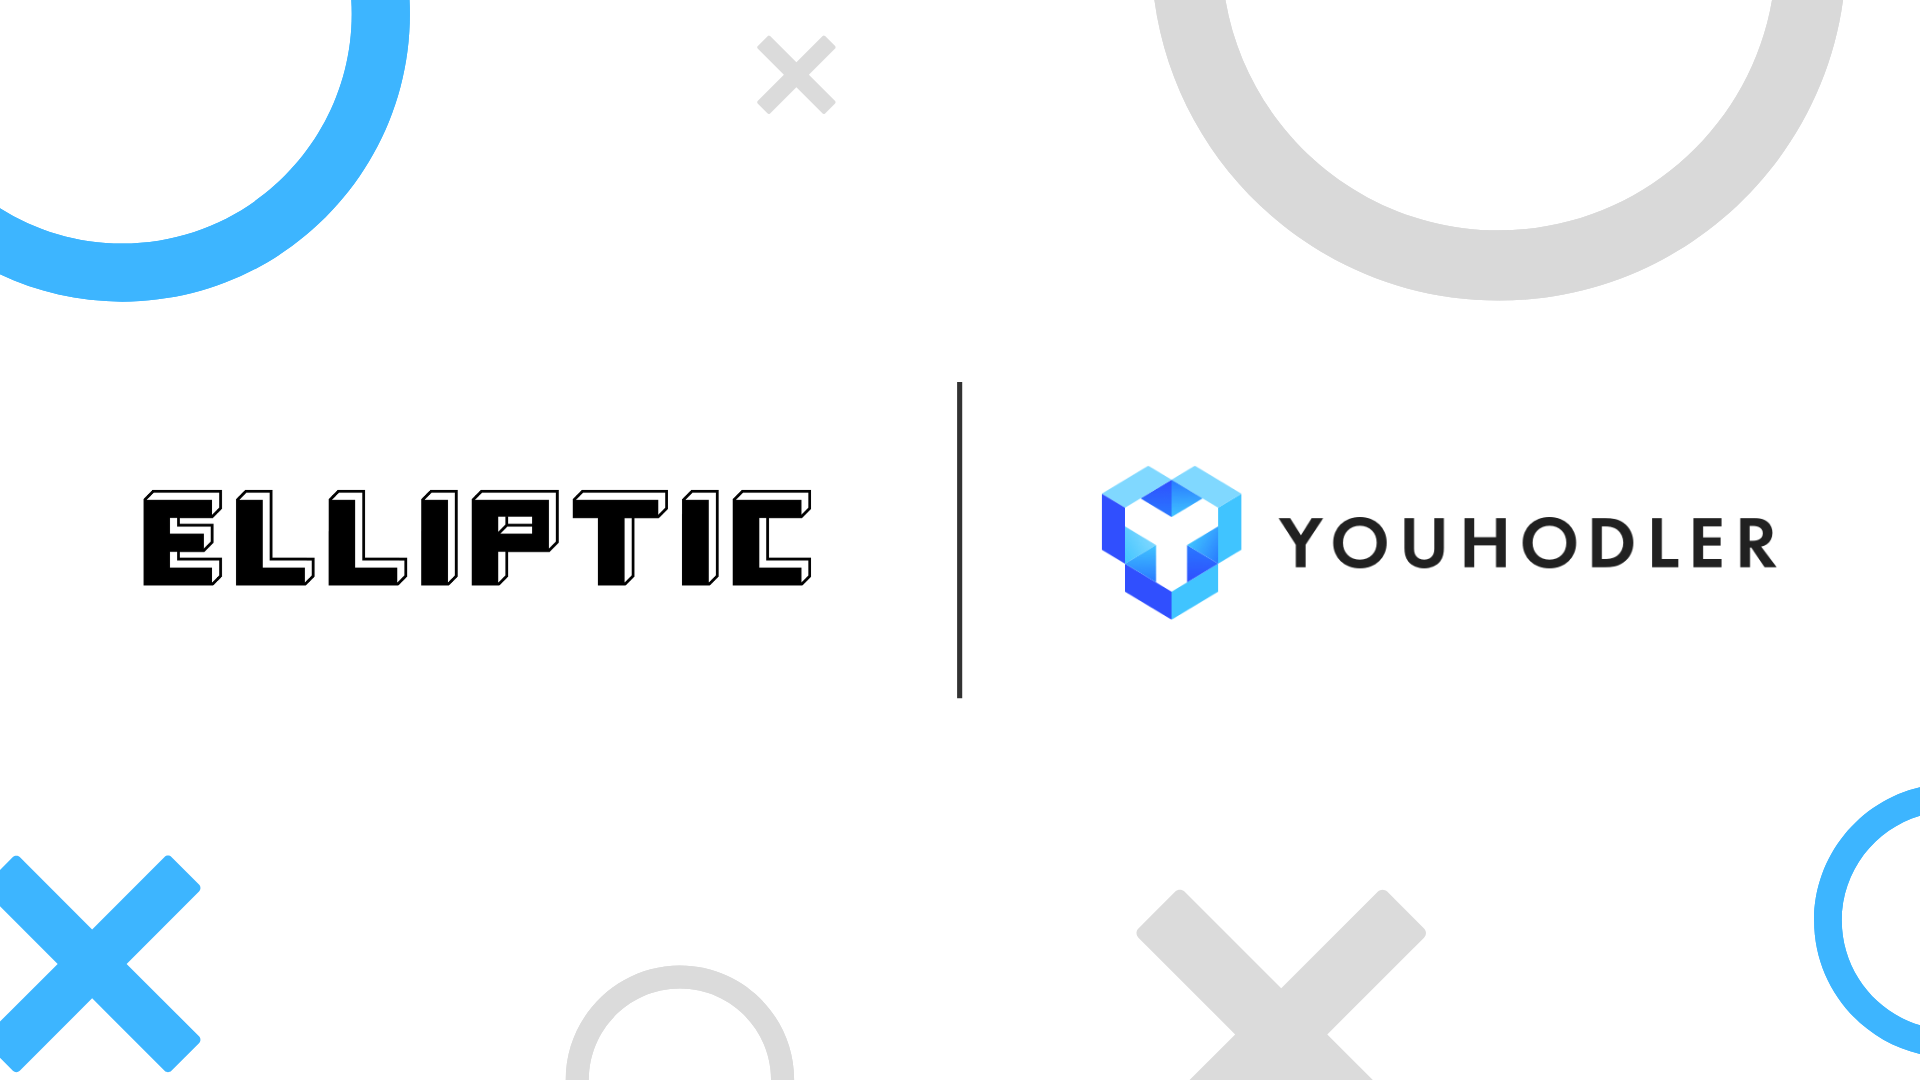 YouHodler Announces New Partnership With Elliptic to Reinforce Security